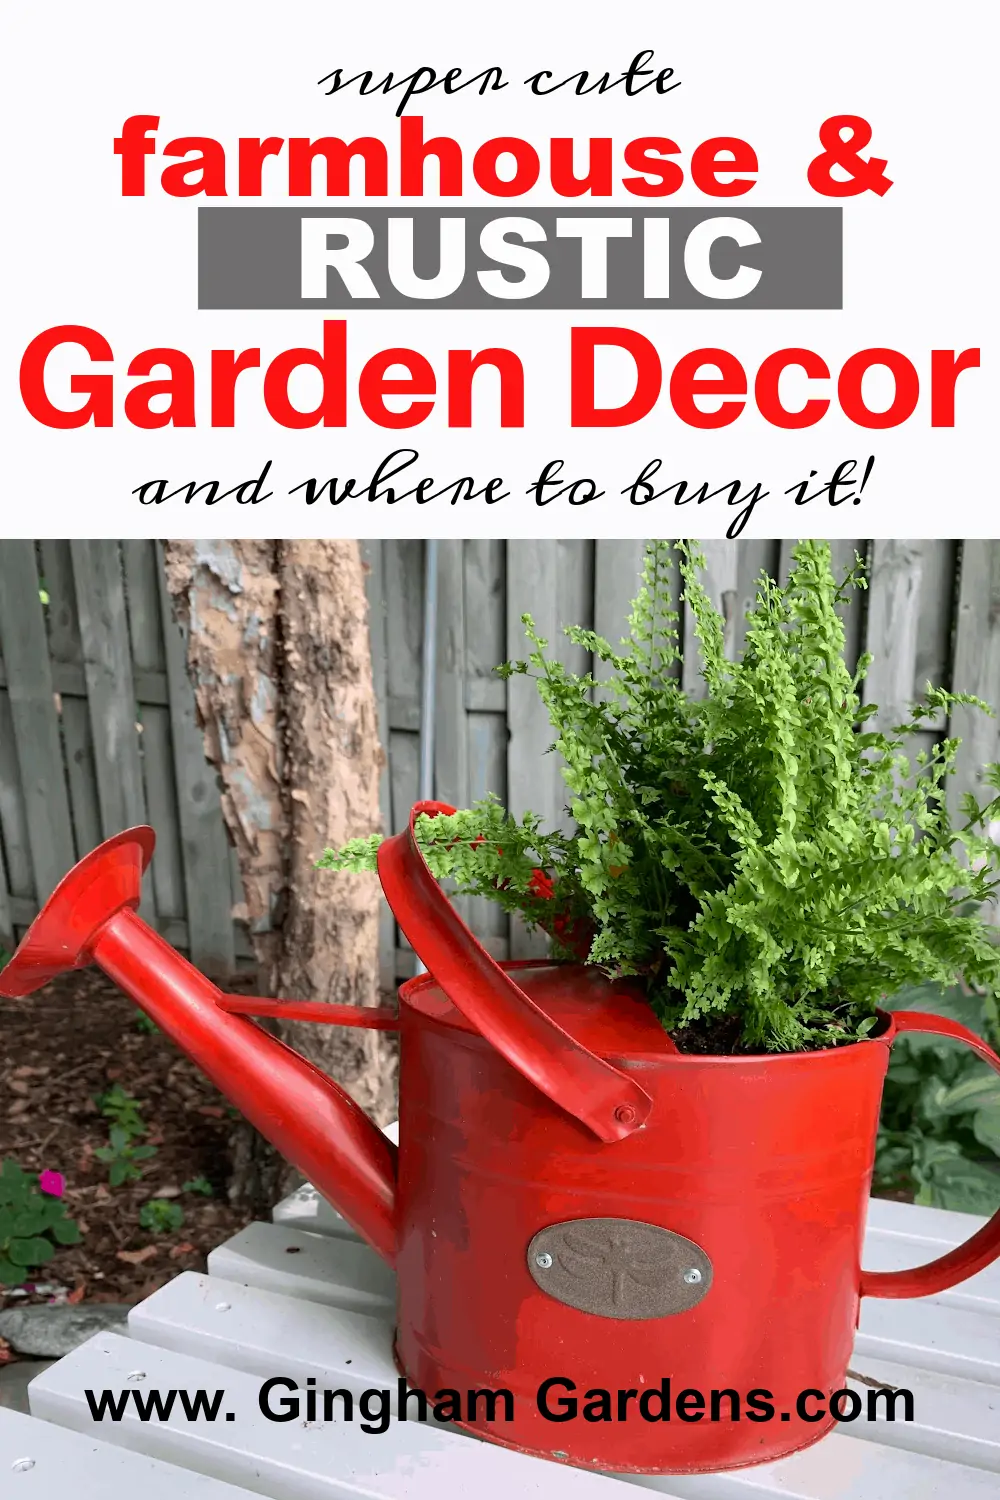 Image of a red watering can used as a planter with text overlay - Farmhouse and Rustic Garden Decor